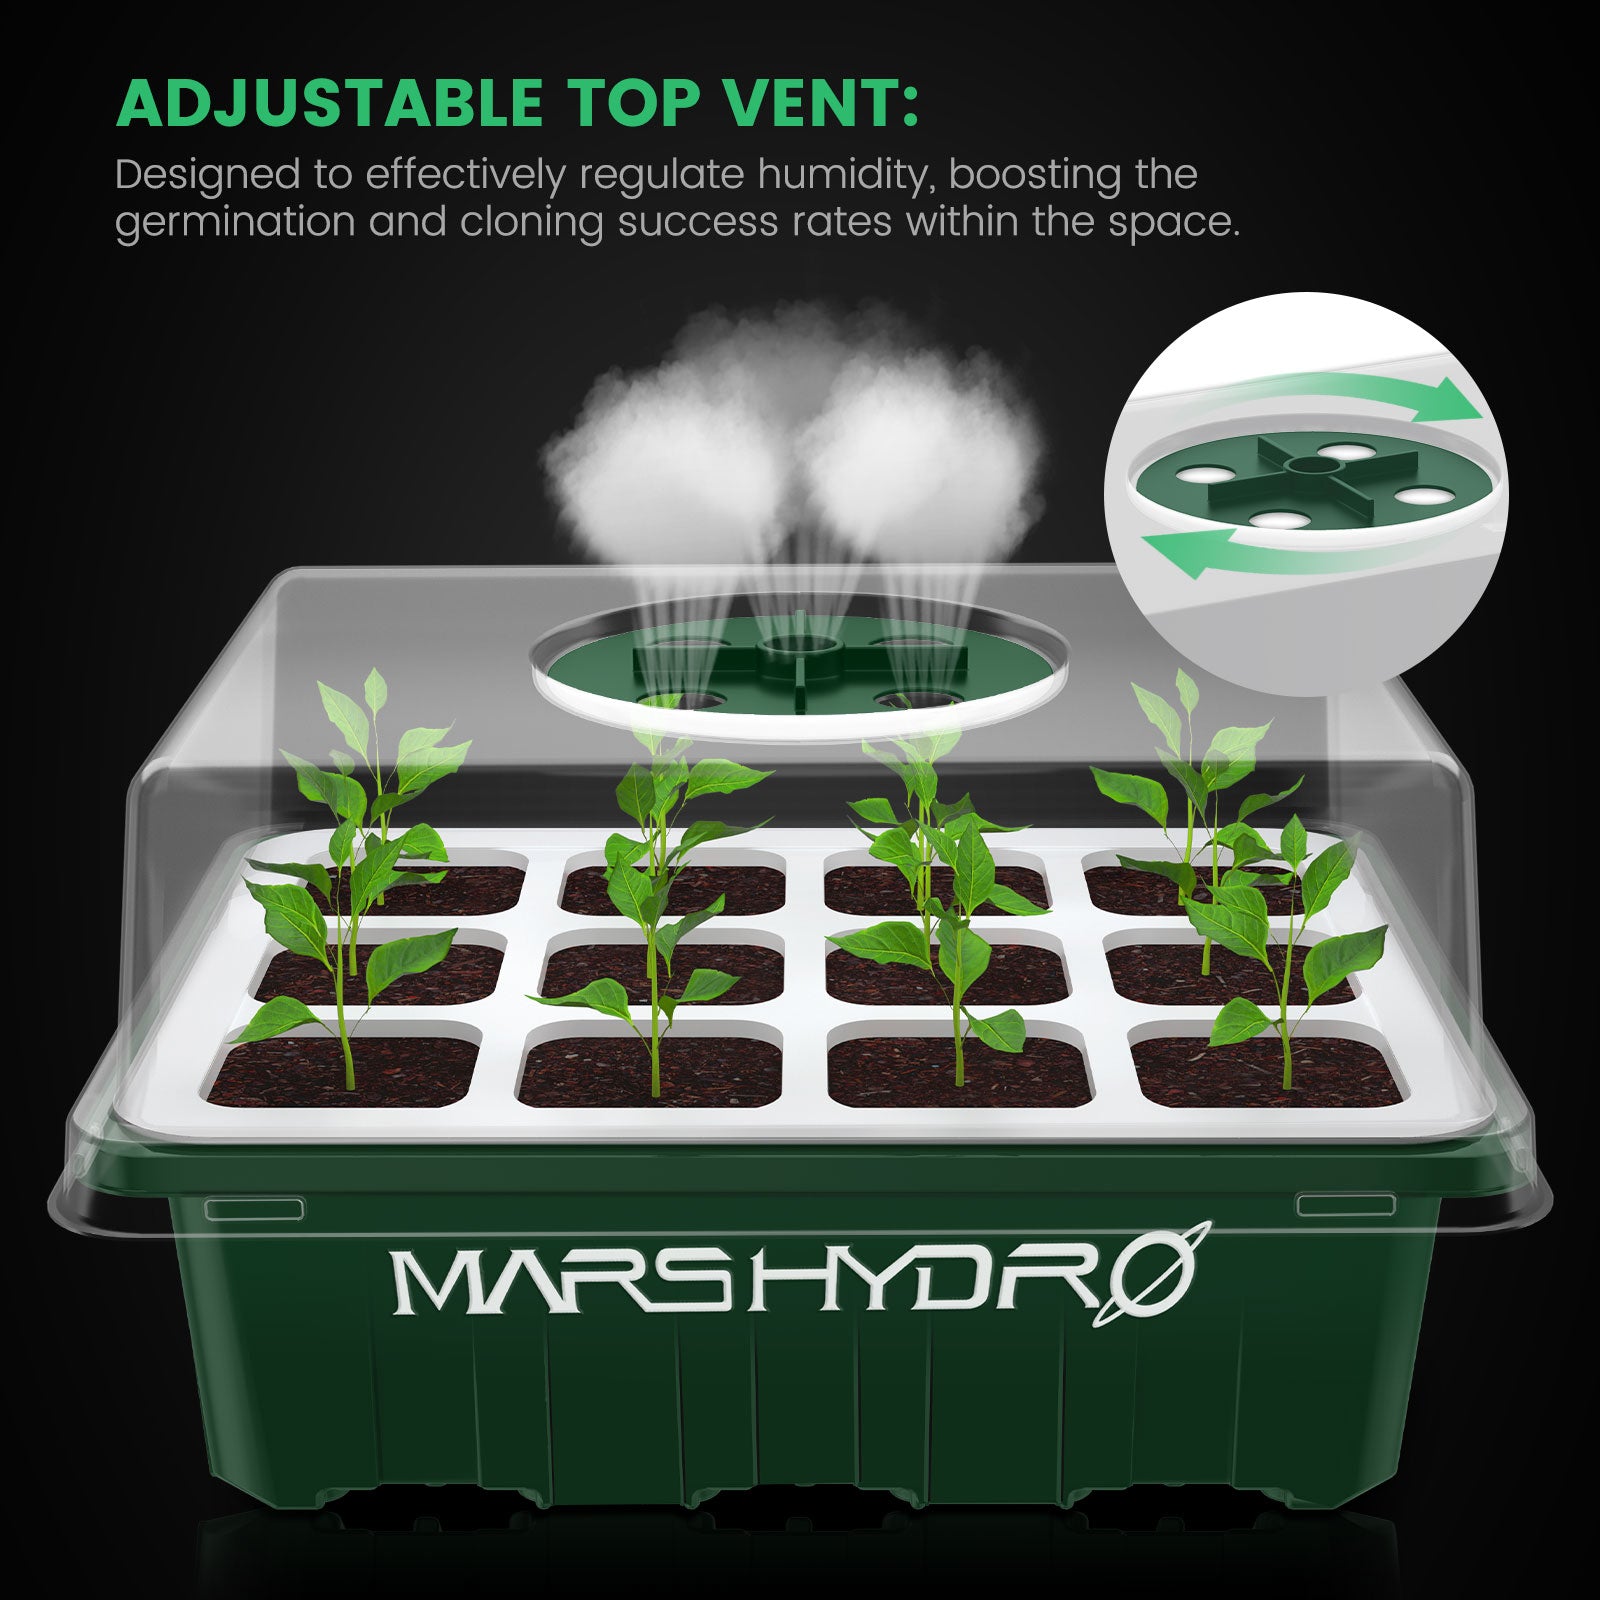 (2 Pack) Mars Hydro Seed Starting Trays for Seed Starting Propagation Cloning Plants